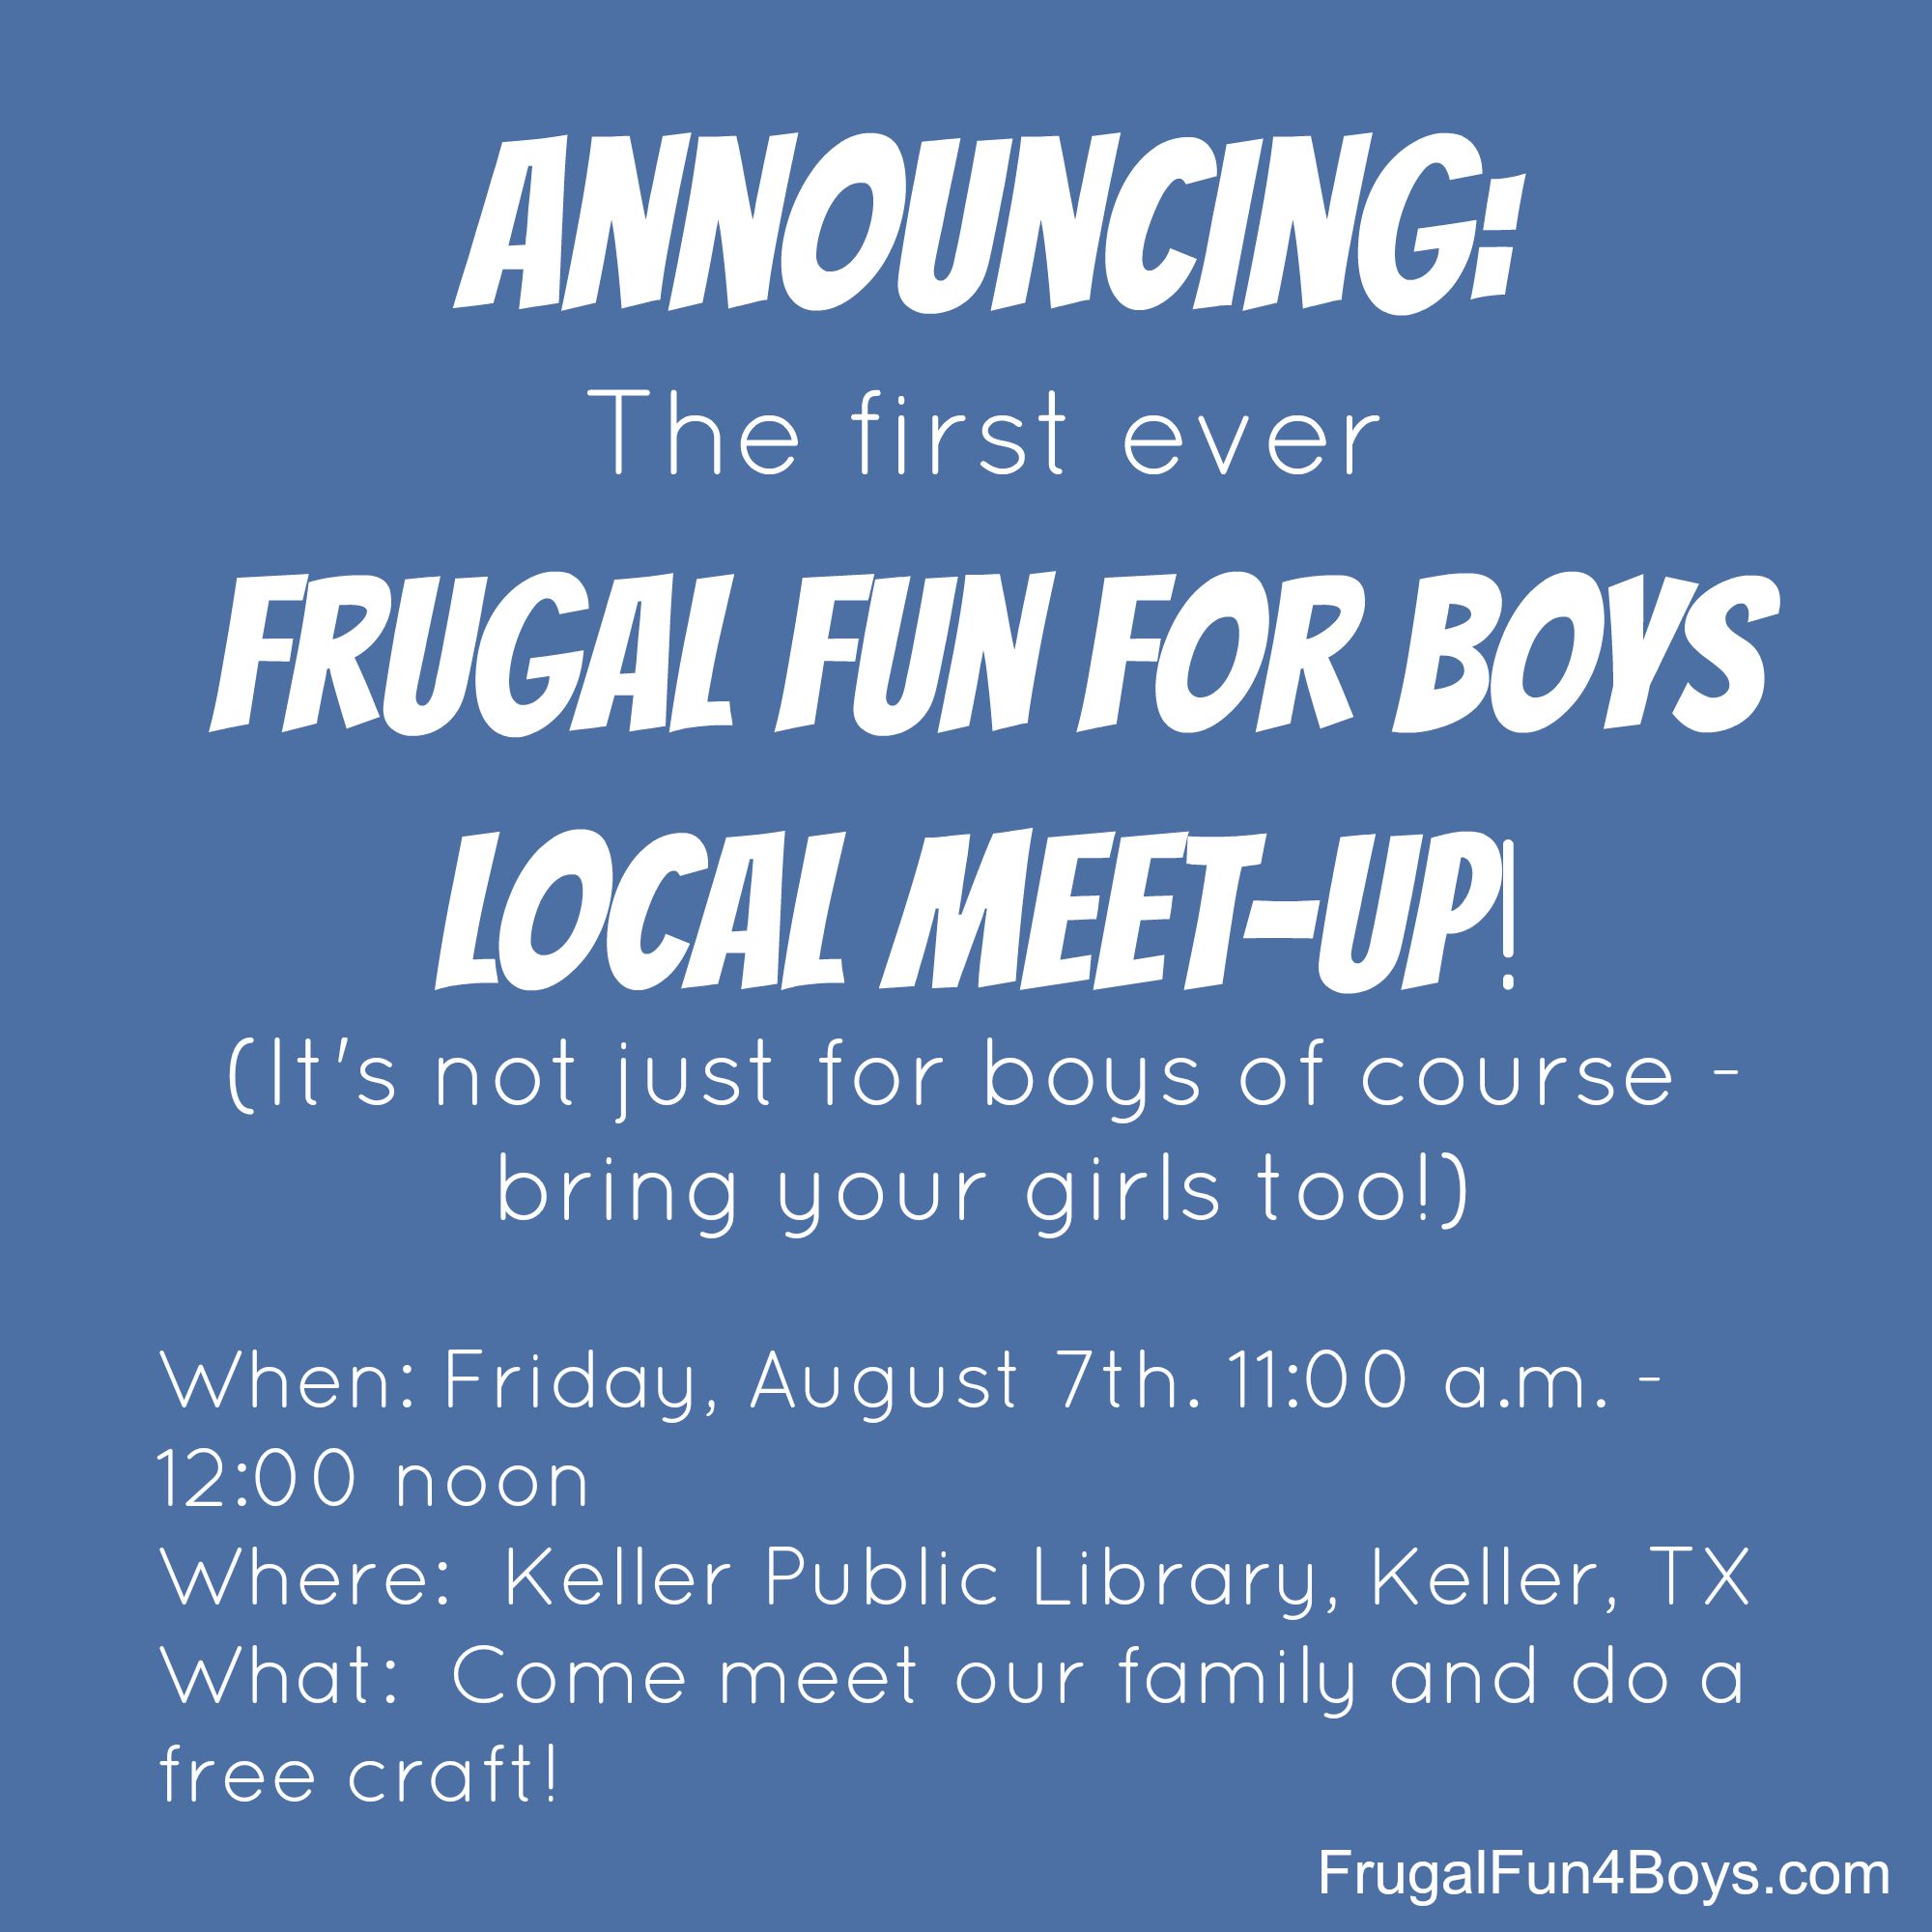 Frugal Fun for Boys - Local Meet-up